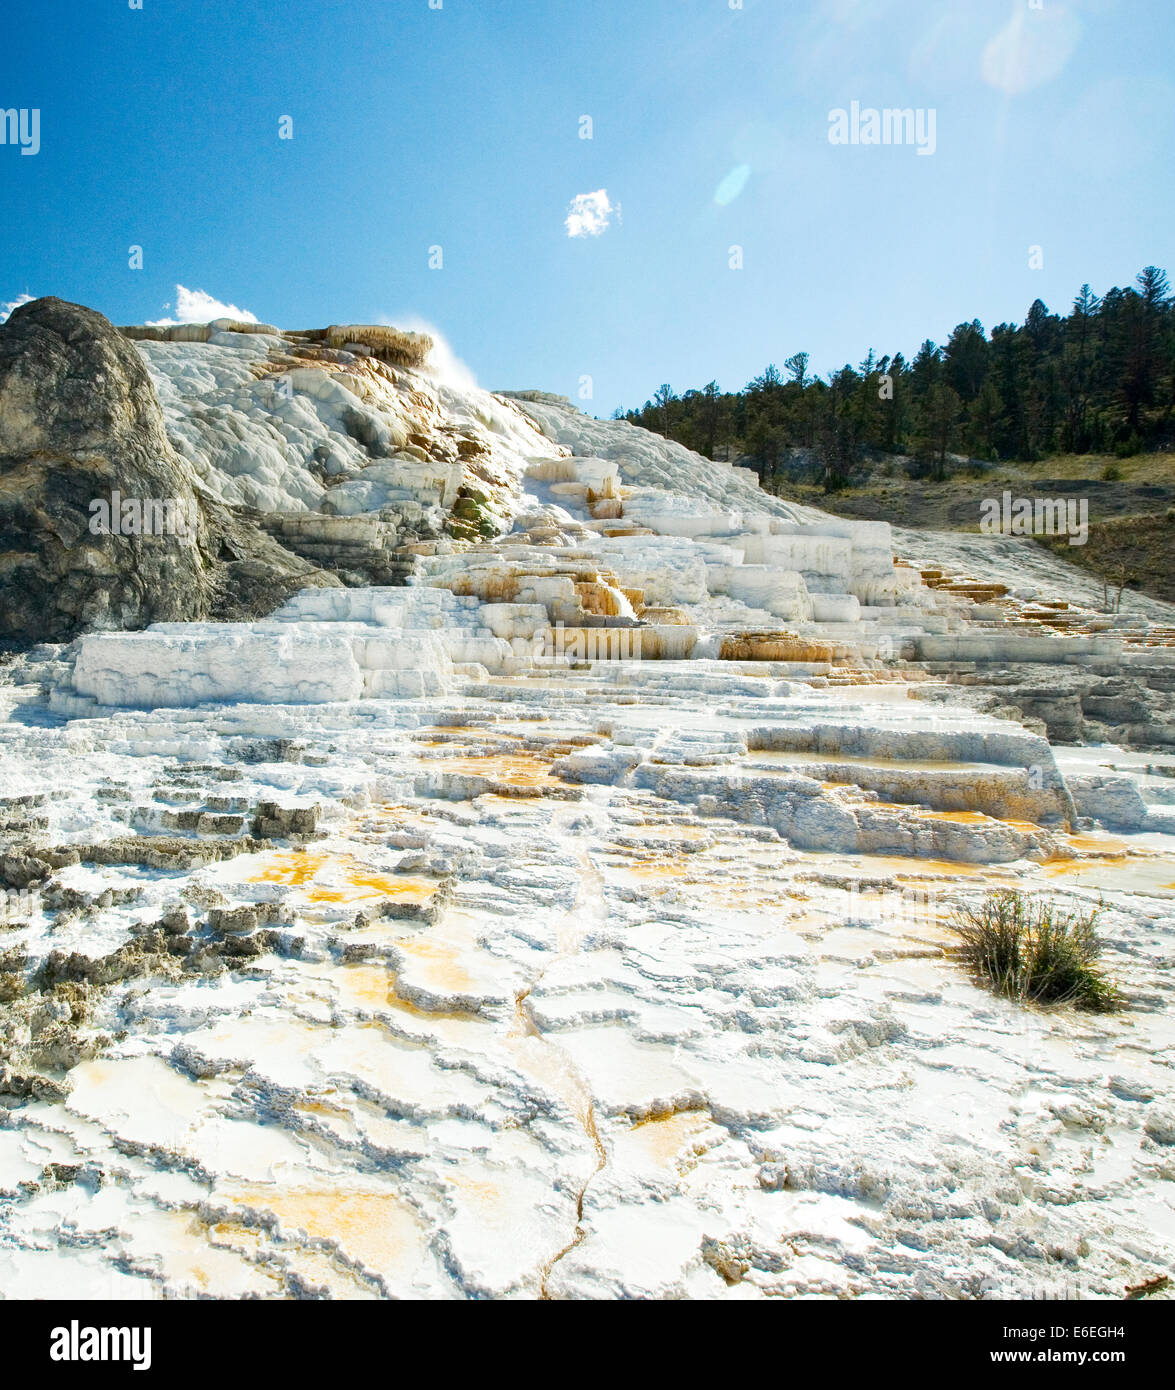 Travertine terraces at Palette Spring, Mammoth Hot Springs, Yellowstone National Park, Wyoming, USA Stock Photo